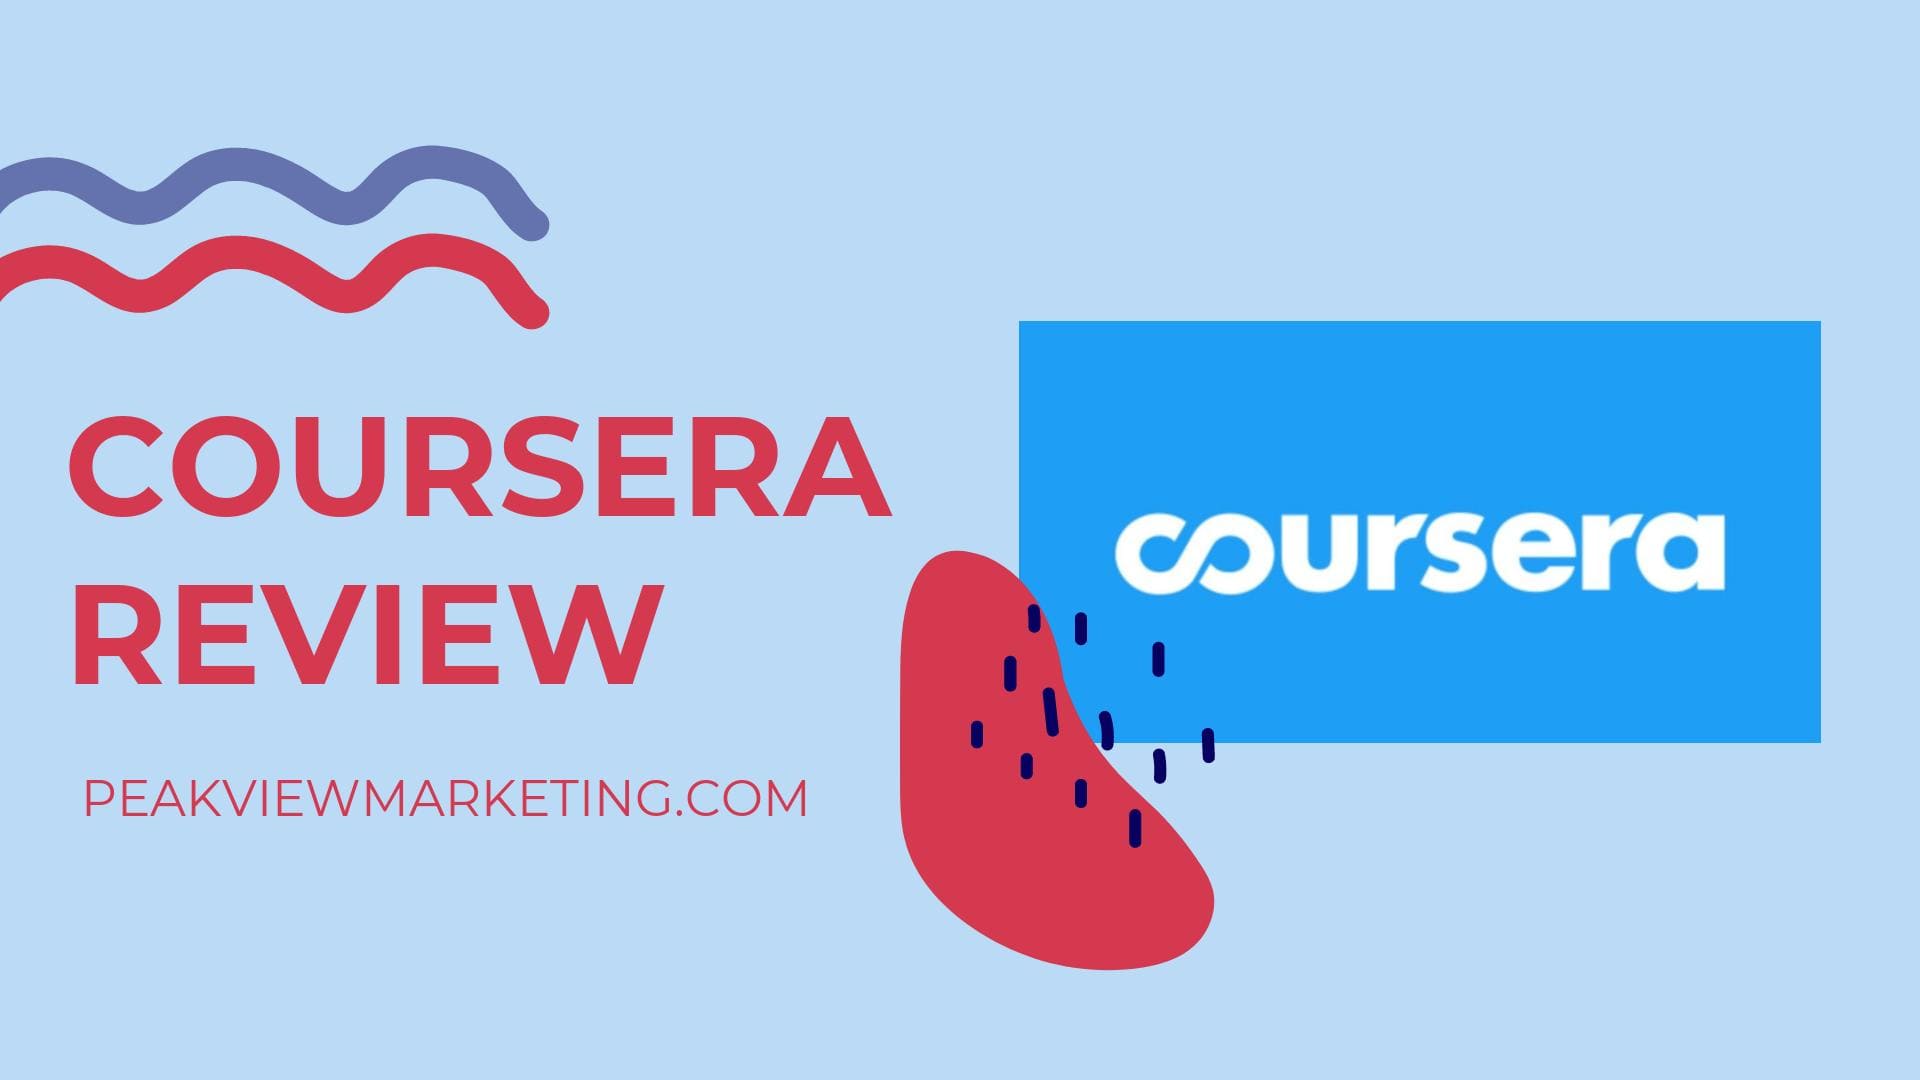 Coursera Review Image